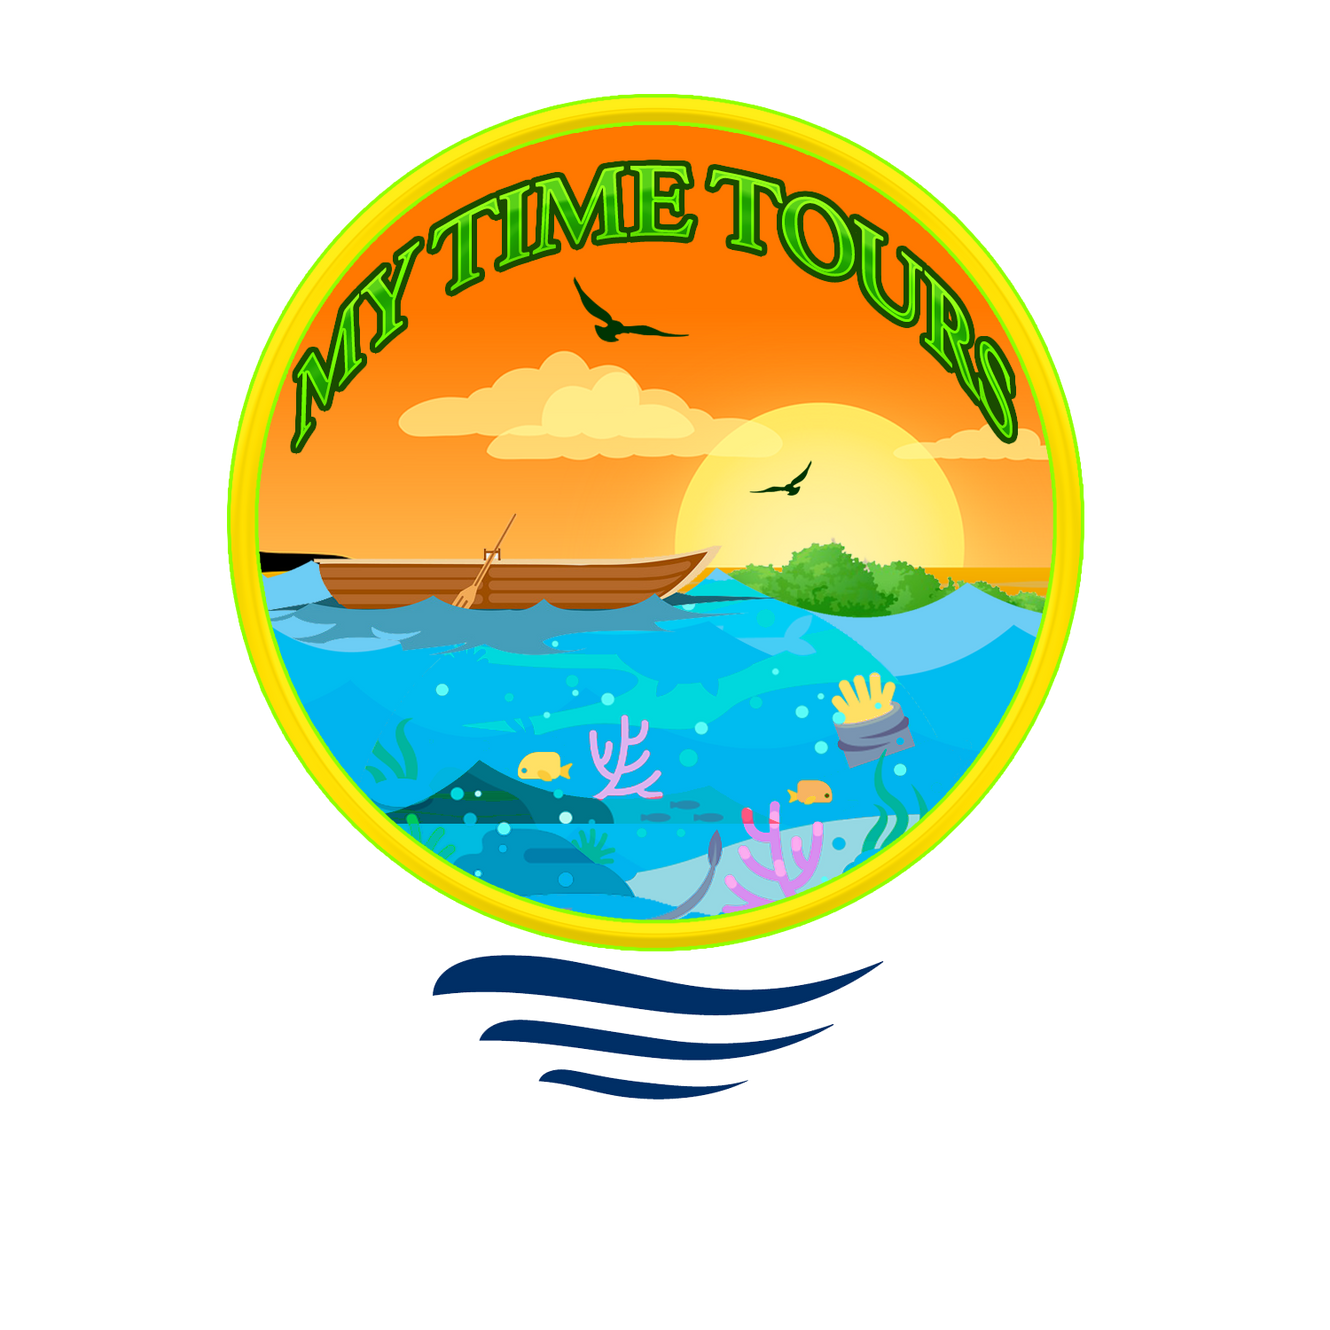 Best Boat Tour Company in Turks and Caicos | My Time Tours